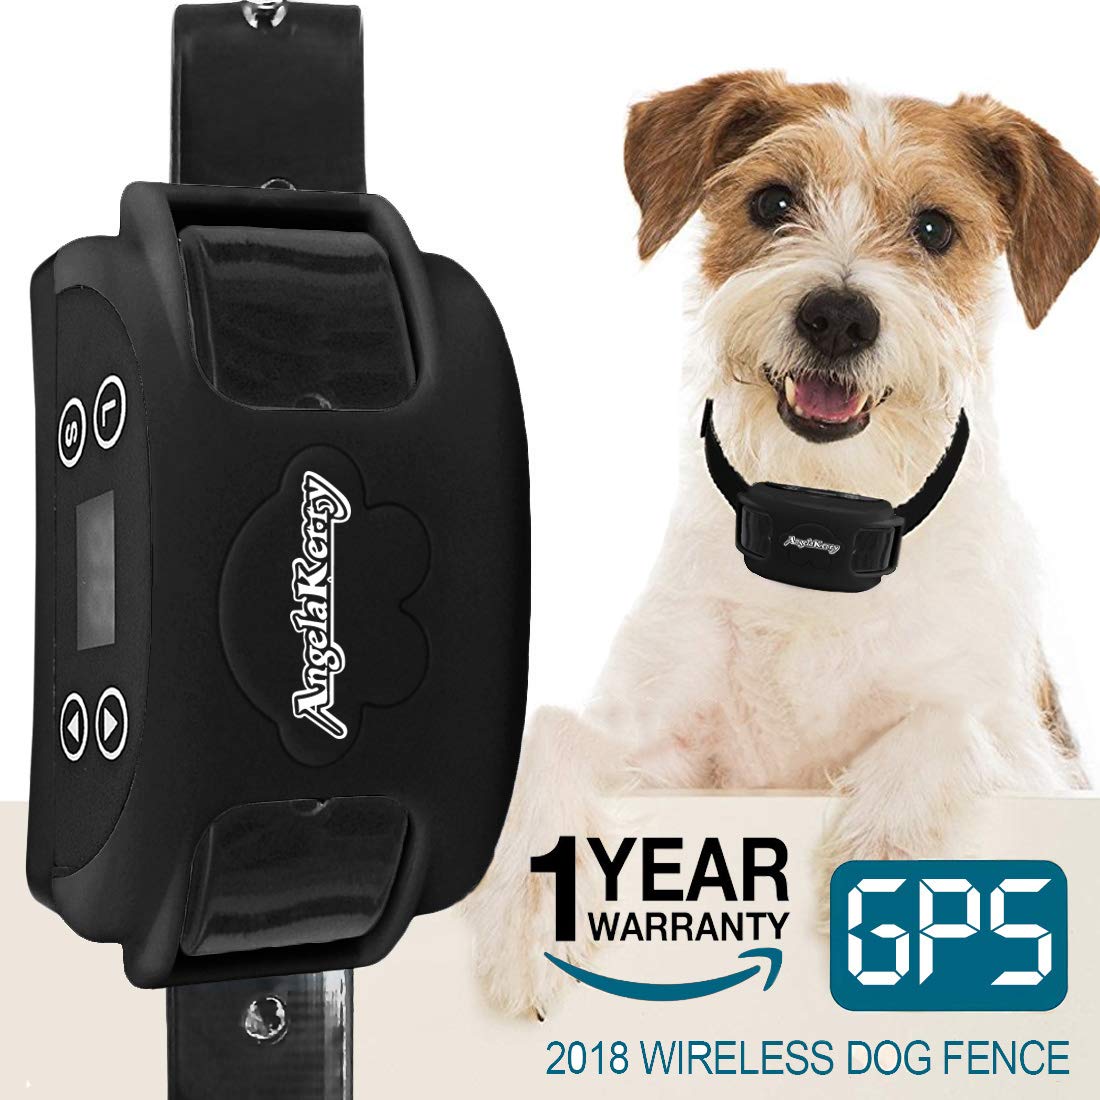 AngelaKerry Wireless Dog Fence System with GPS, Outdoor Invisible Pet Containment System Rechargeable Waterproof Collar 850YD Remote for 15lbs-120lbs Dogs (Black, 1pc GPS Receiver by 1 Dog)